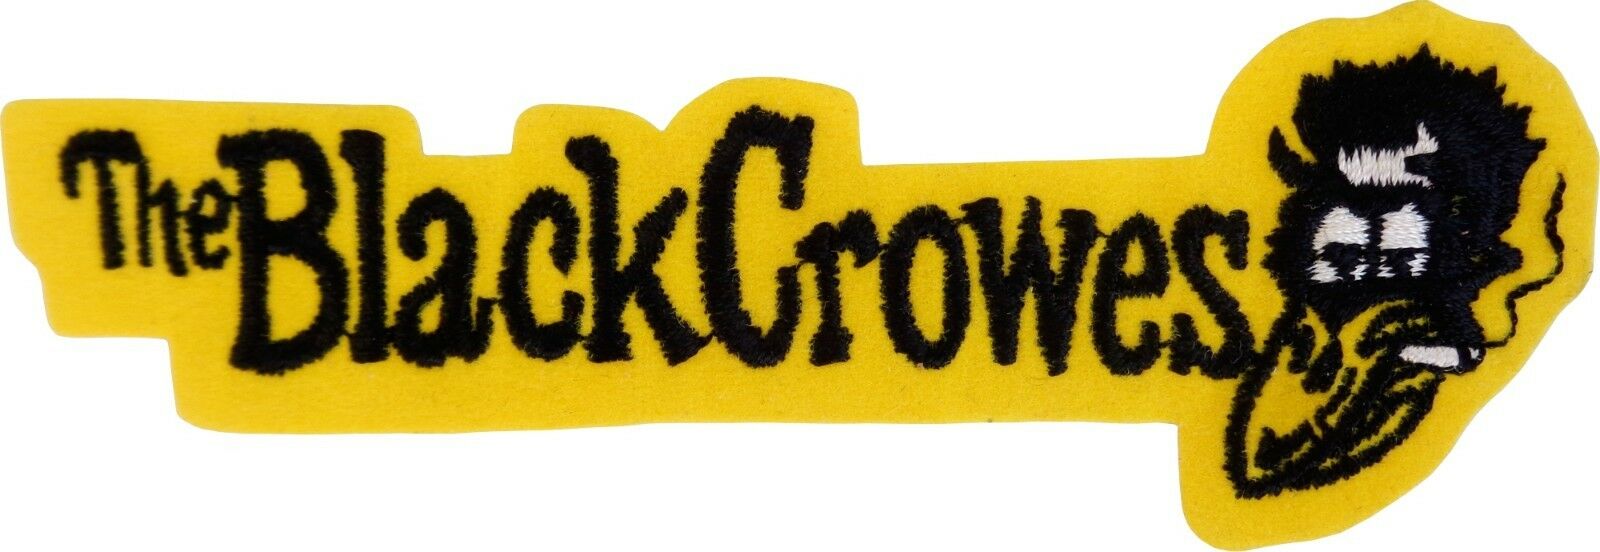 Patch - The Black Crowes Logo Rock Band 90s Blues Music Embroidered Iron On 6668